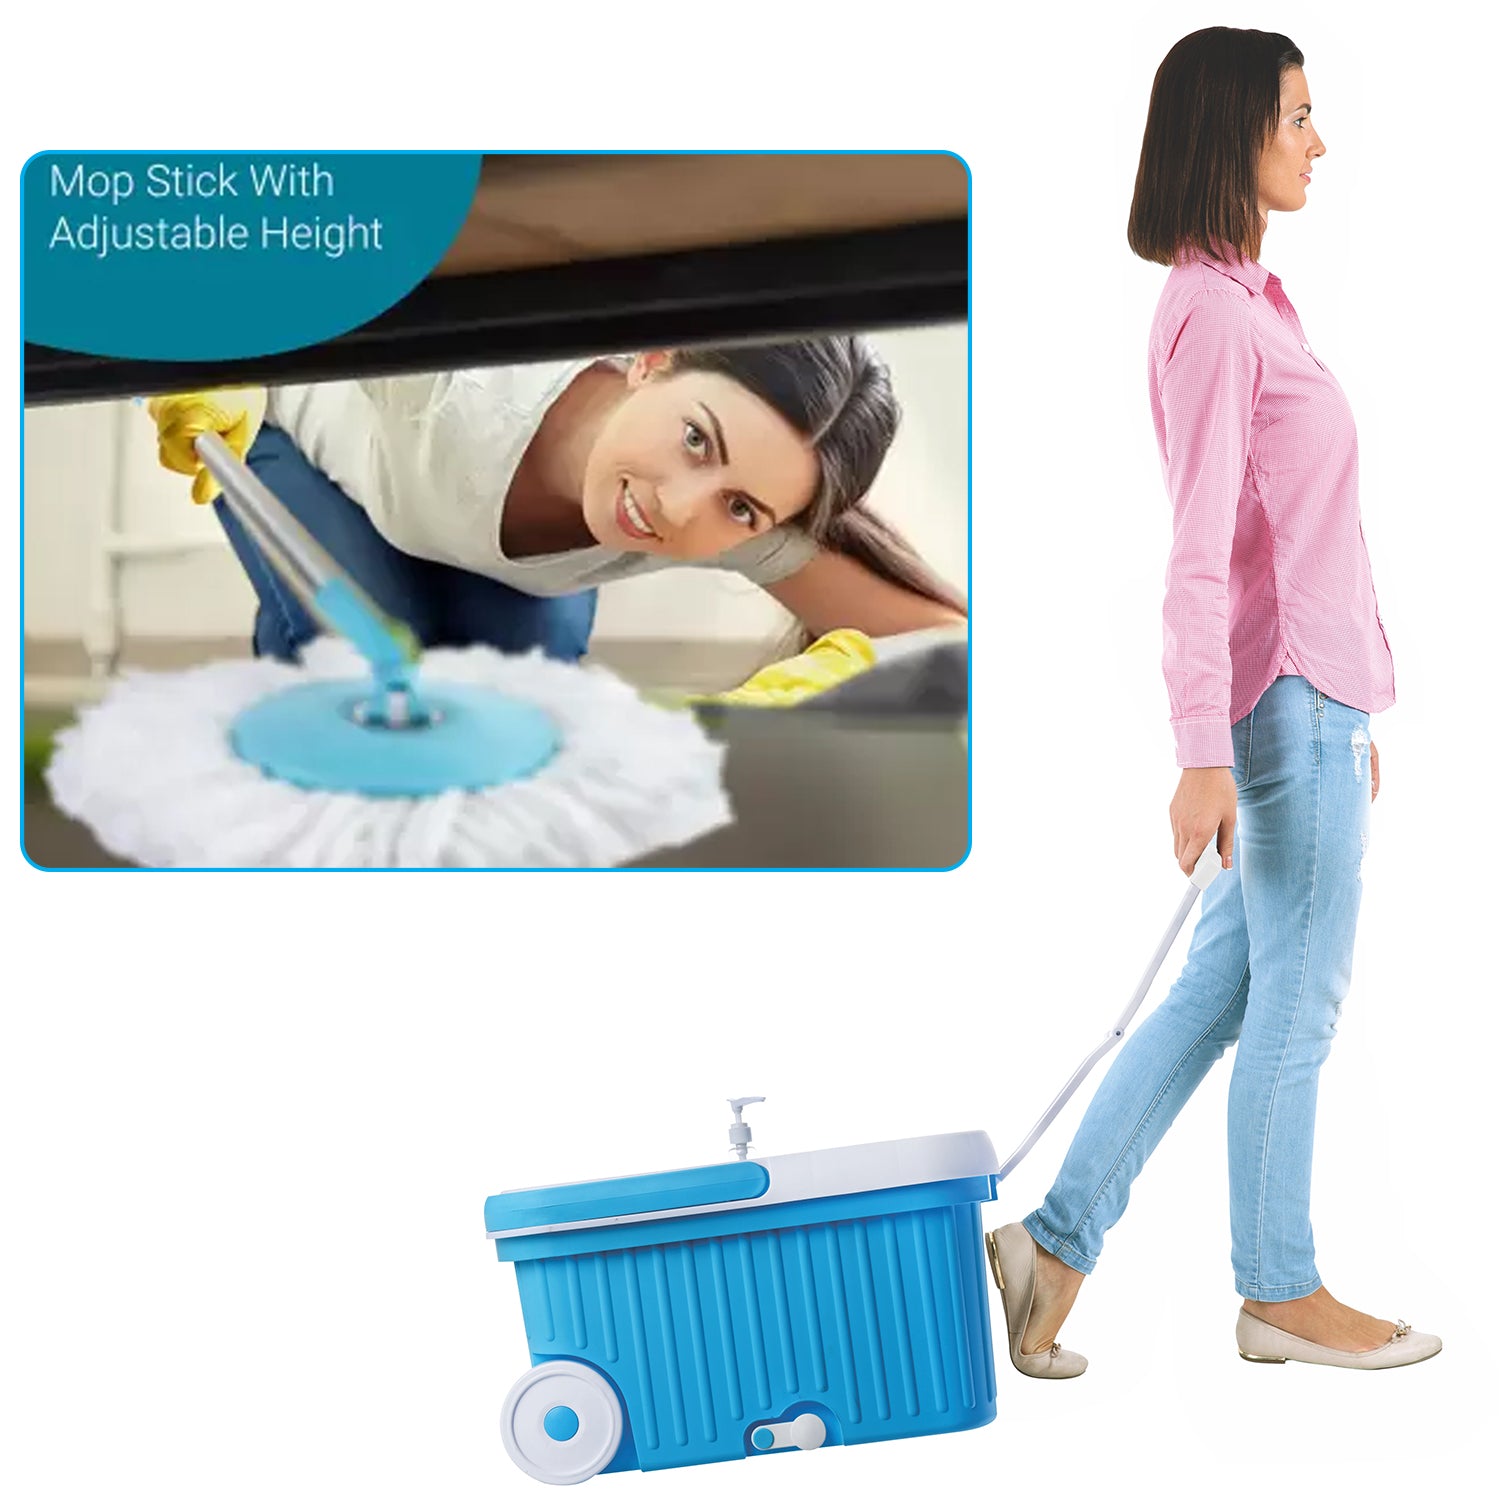 8712 Sporty Plastic Spin Mop with Bigger Wheels and Plastic Auto Fold Handle for 360 Degree Cleaning. DeoDap